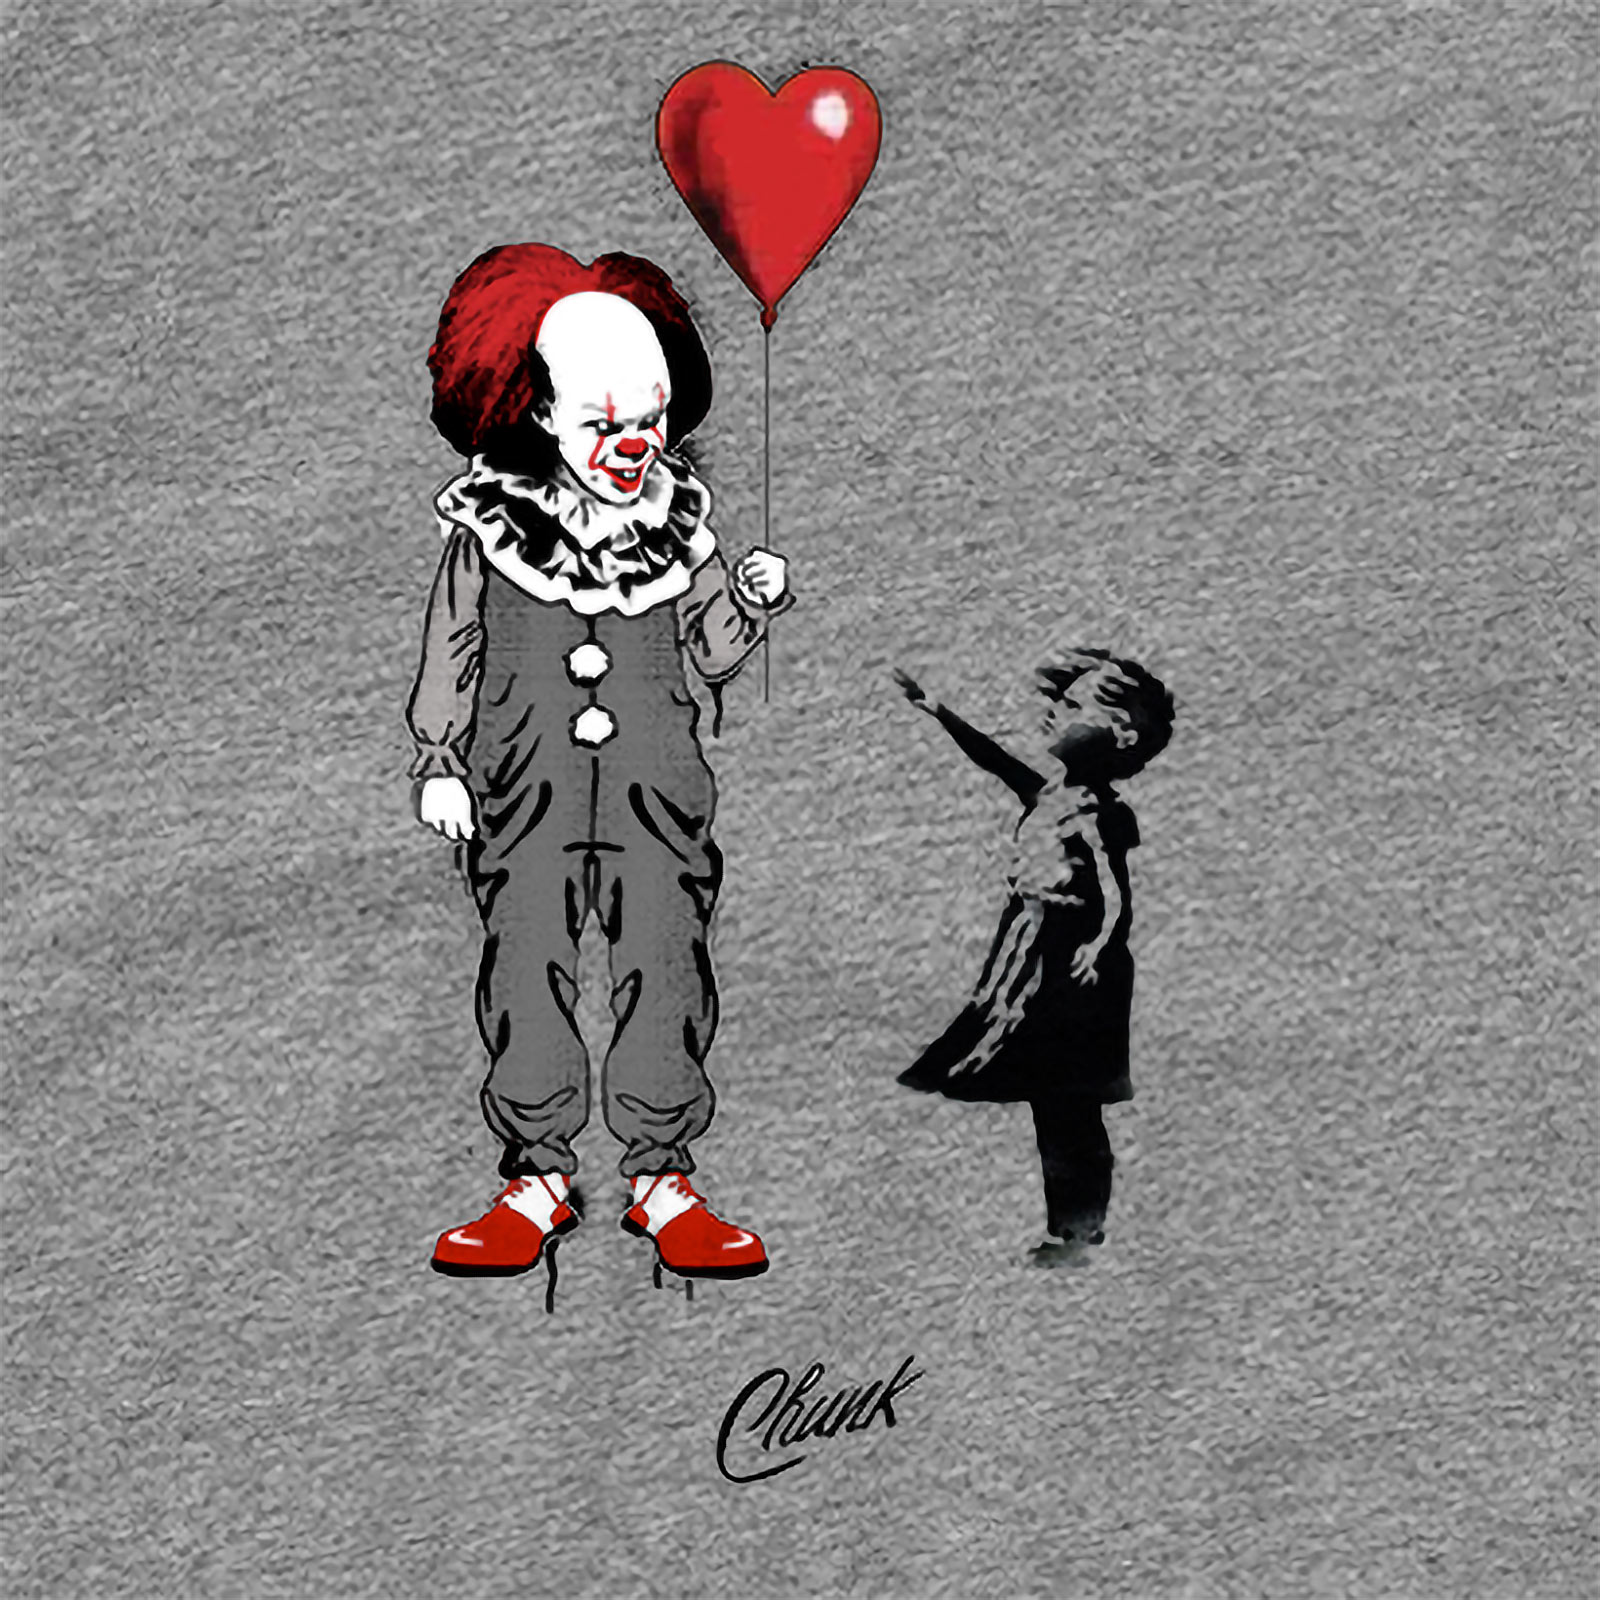 Pennywise with Heart Balloon T-Shirt for Stephen King's IT Fans